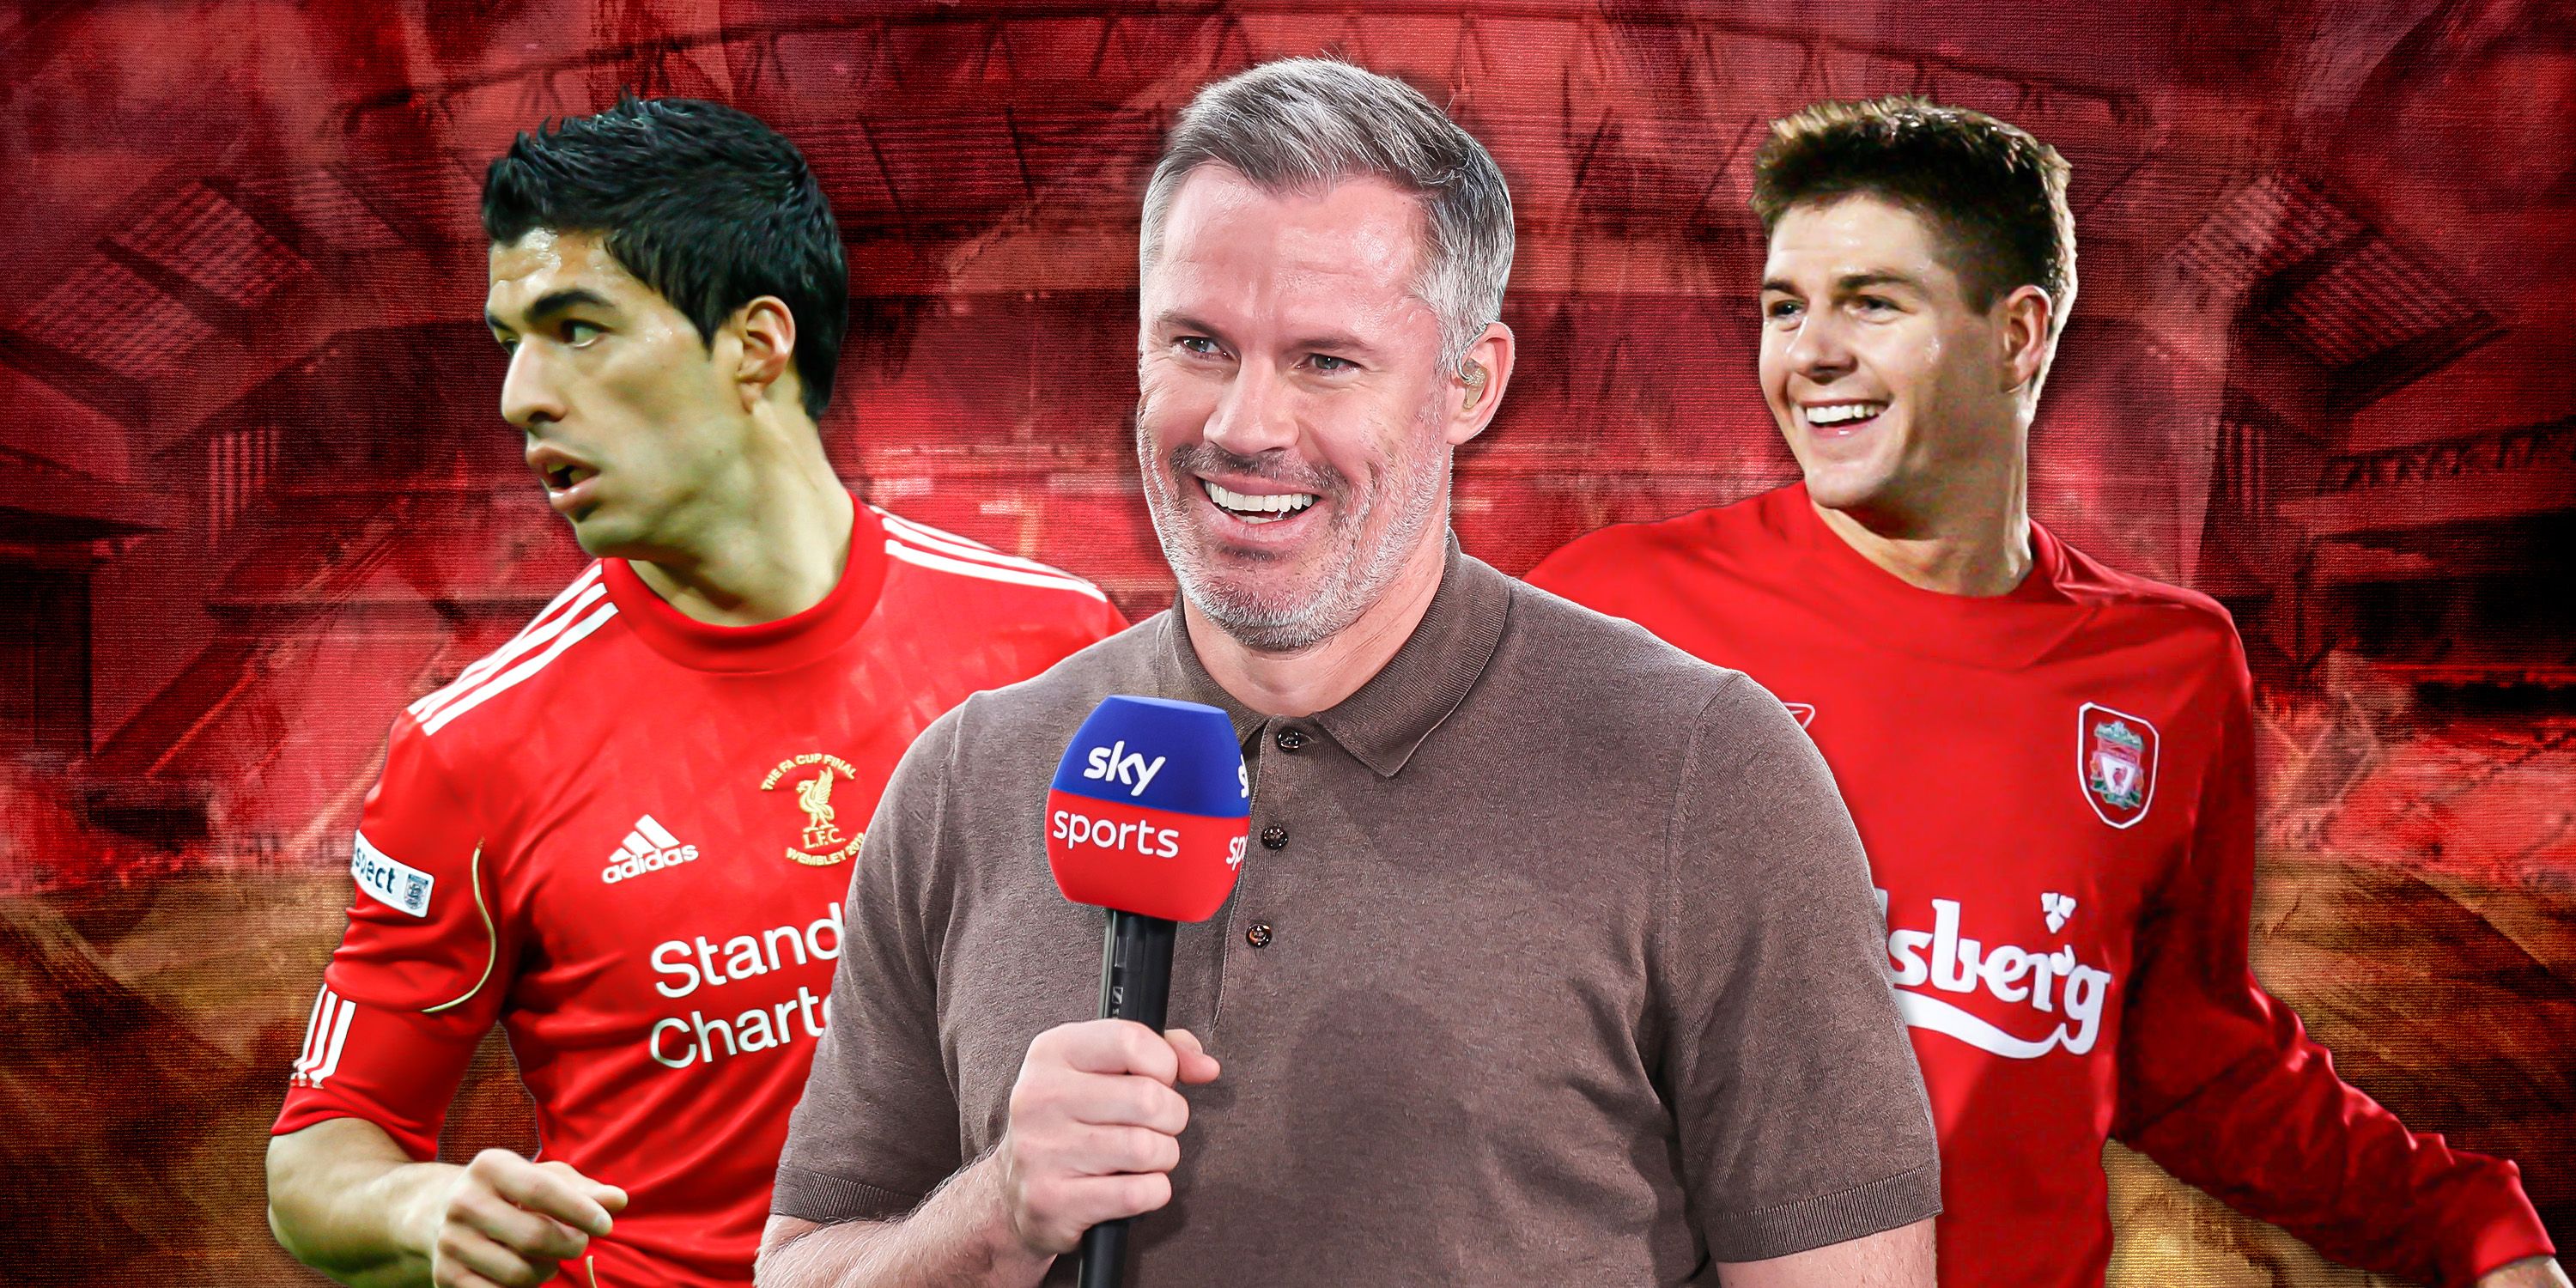 Jamie Carragher and on either side Luis Suarez and Steven Gerrard in Liverpool kit